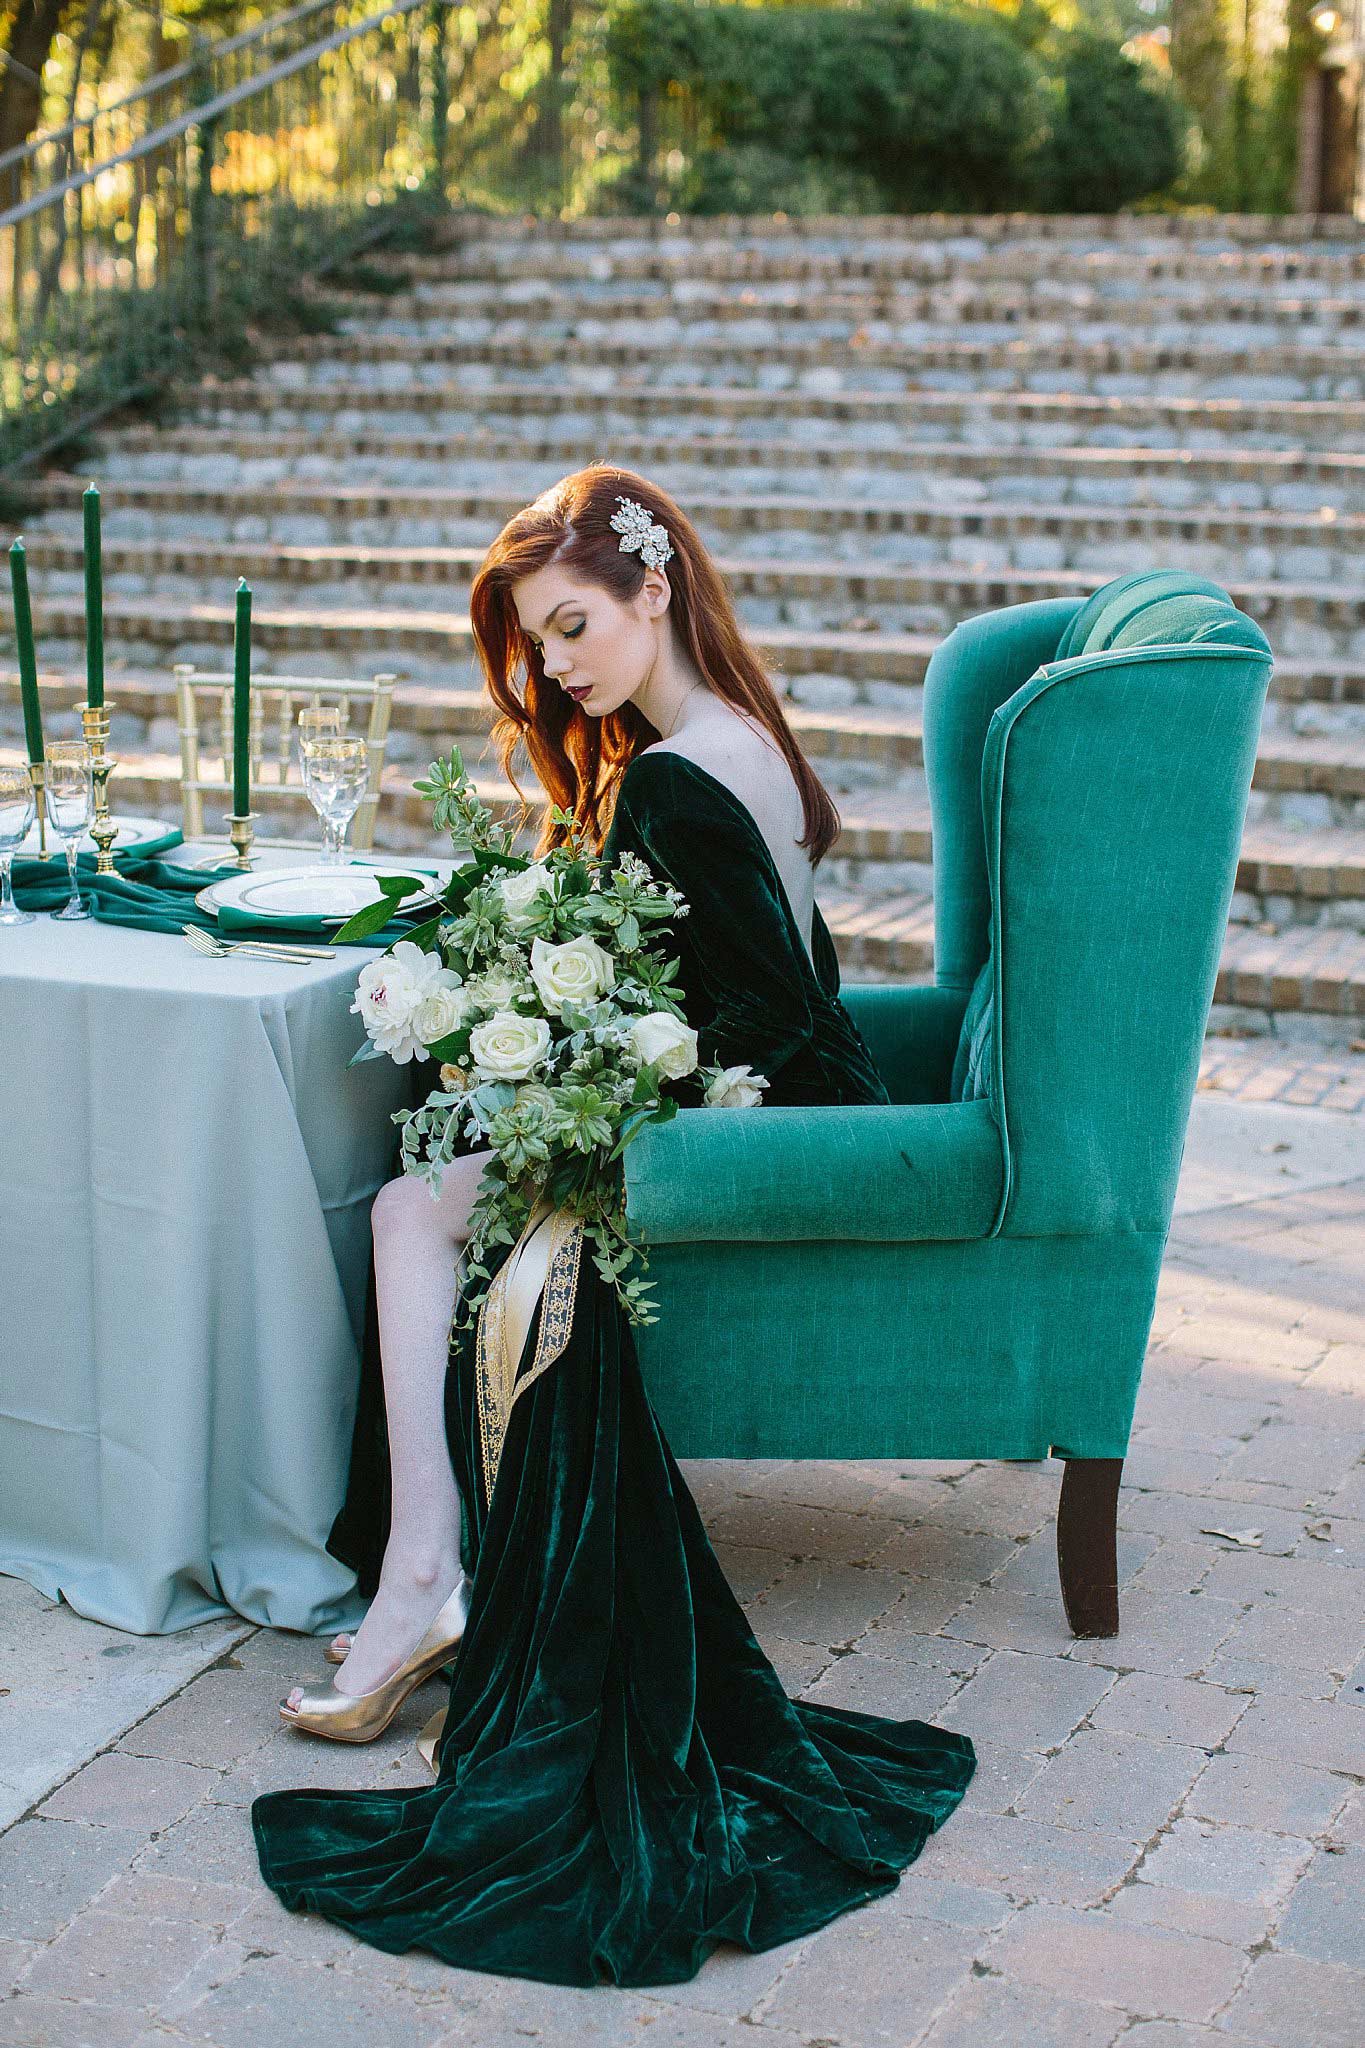 aristide mansfield wedding bridesmaid with green dress sitting at vintage green chair